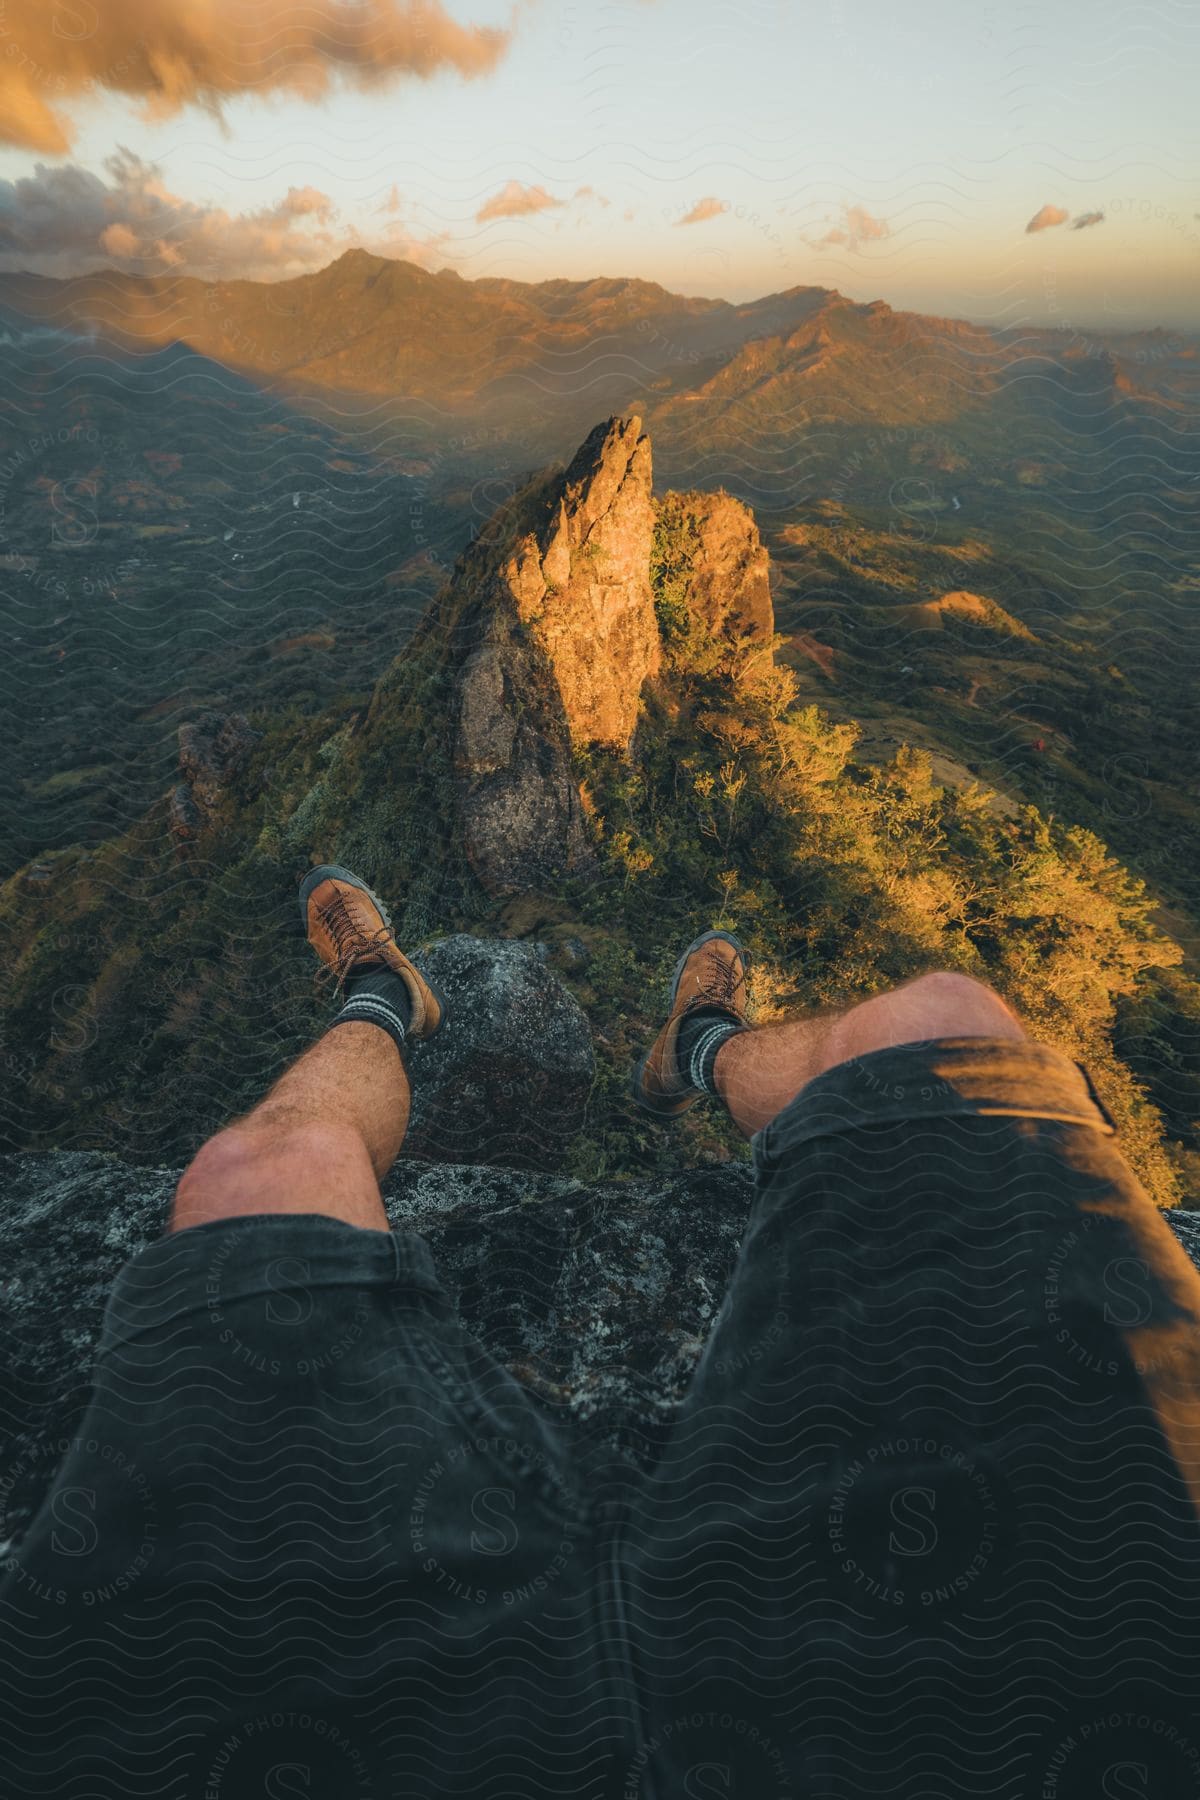 Person's perspective sitting on a mountain edge overlooking a rugged peak and valley during sunset.